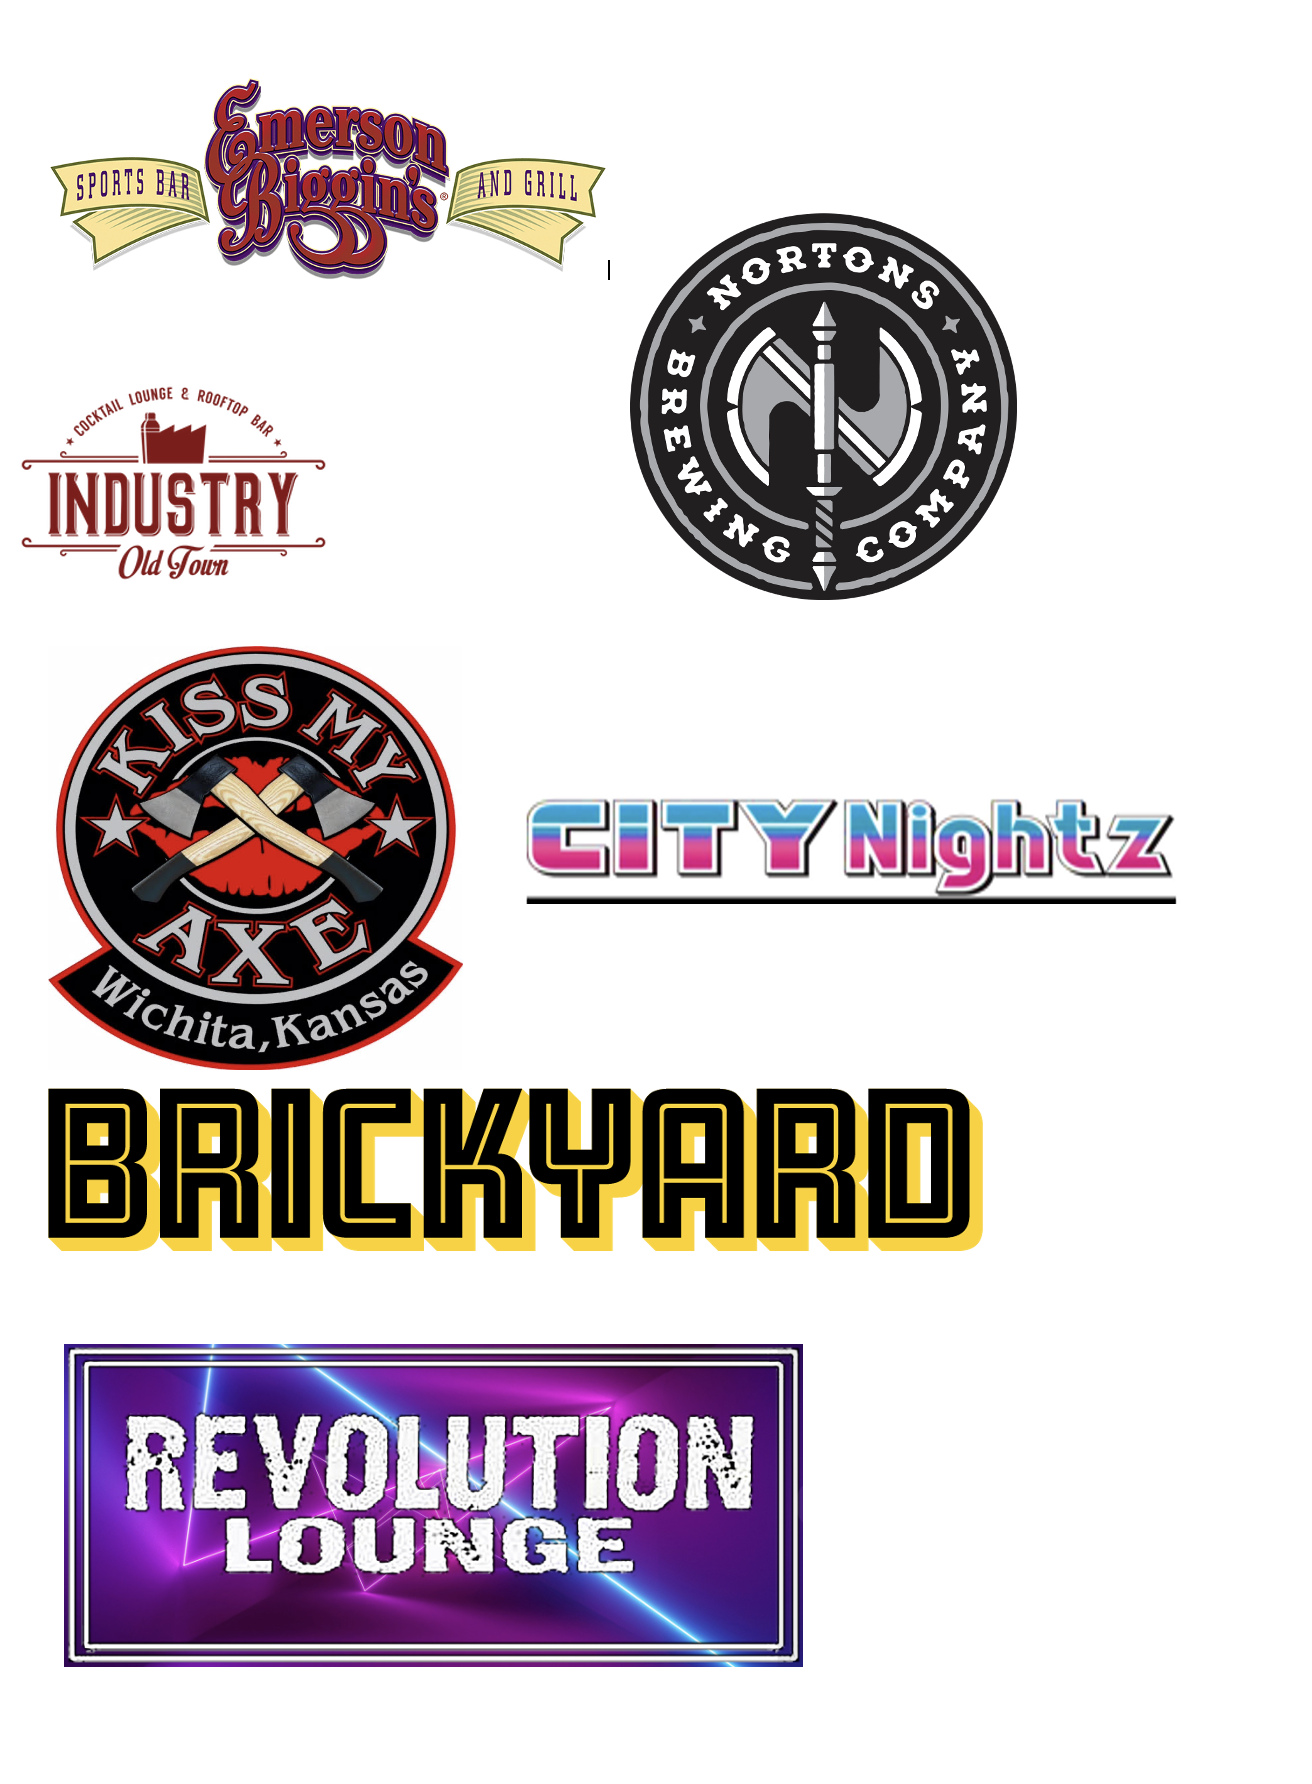 Participating bars, Emerson Biggins, Brickyard, Industry Old Town, Kiss My Axe